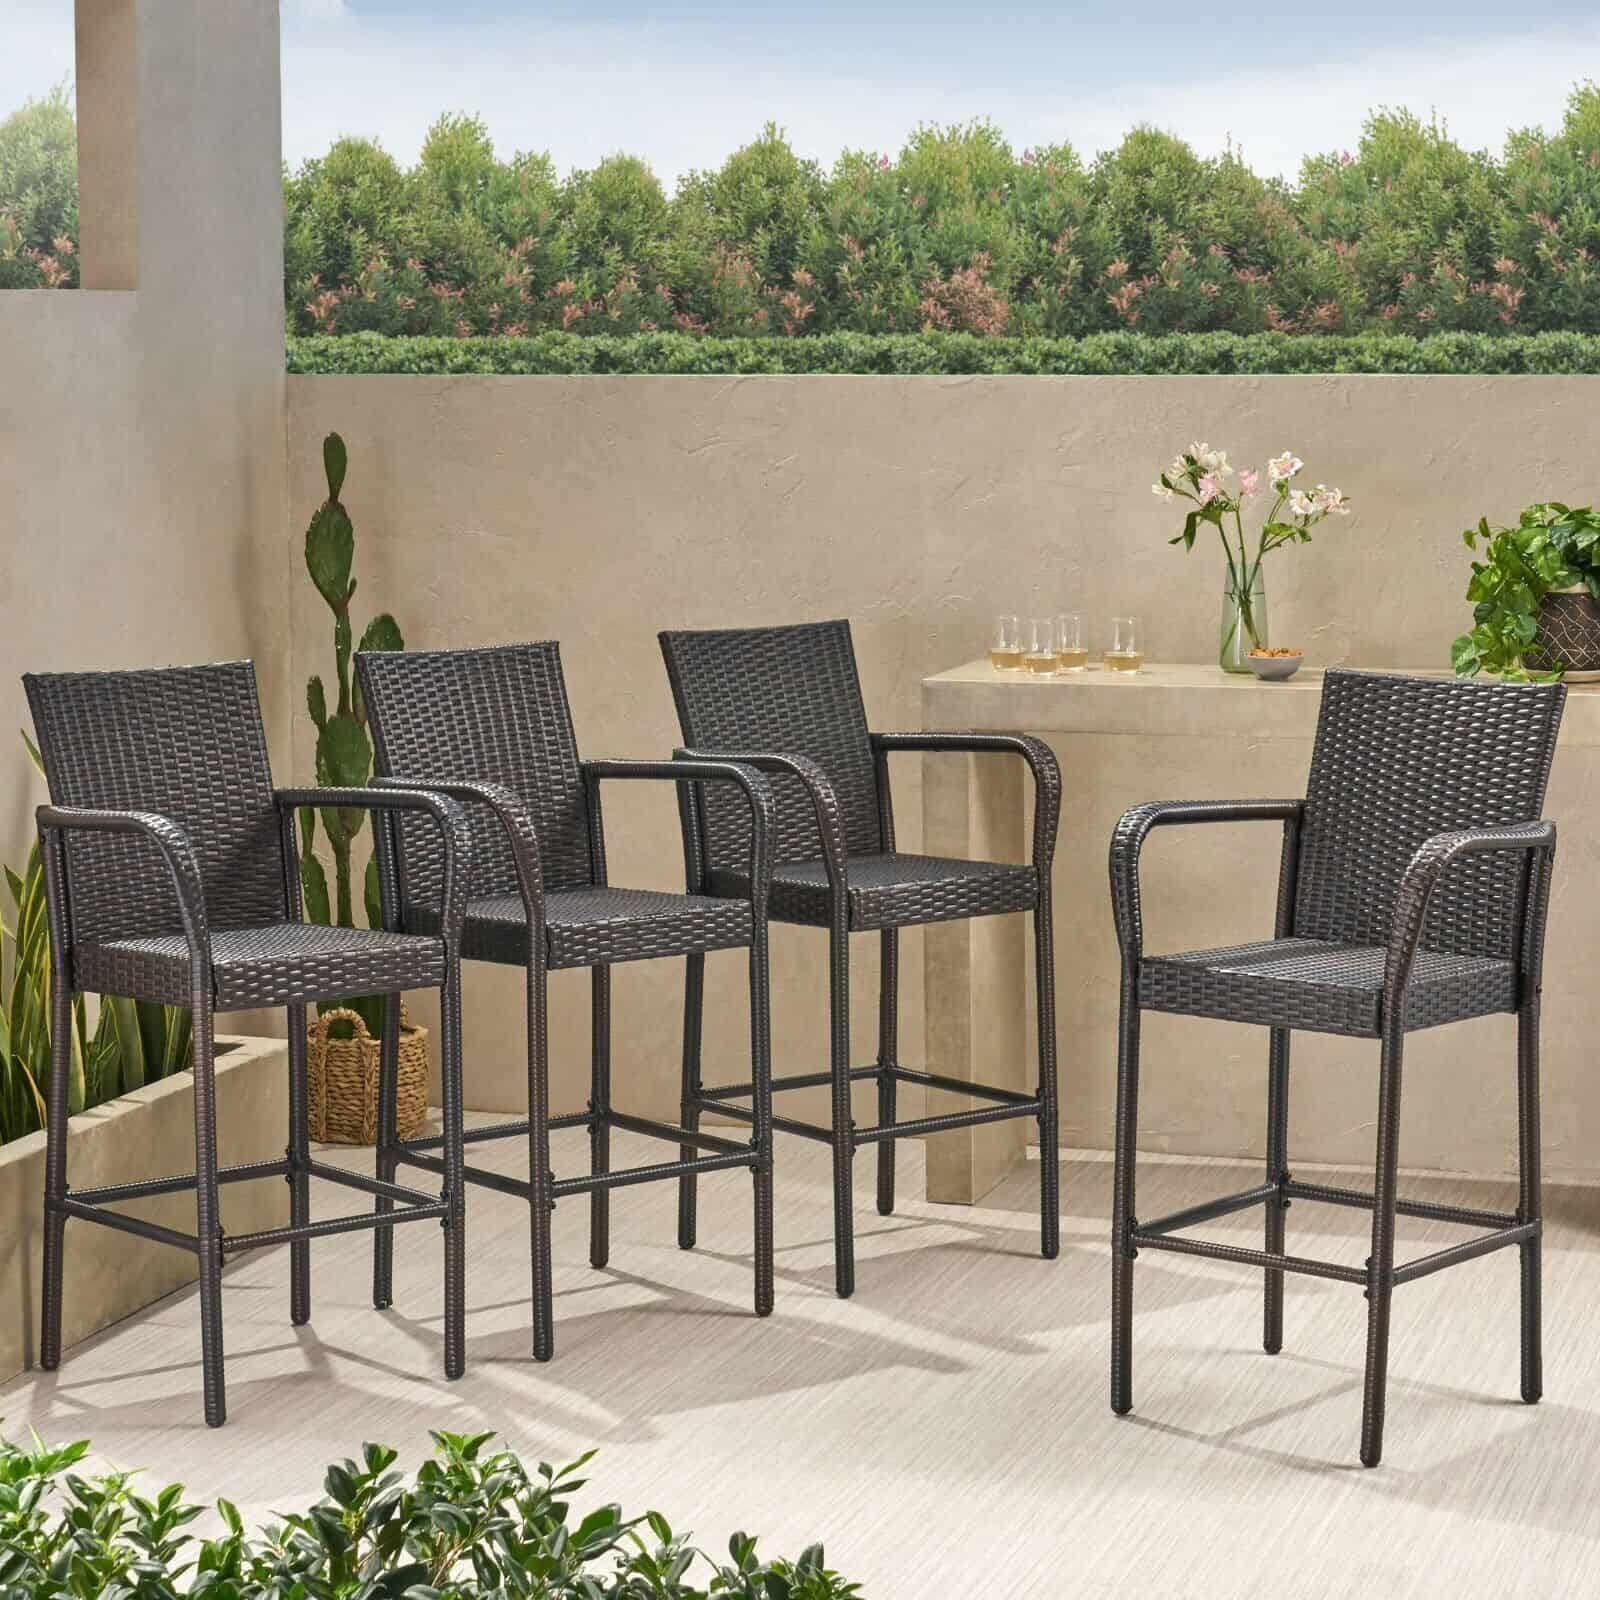 Four wicker bar stools on a patio.